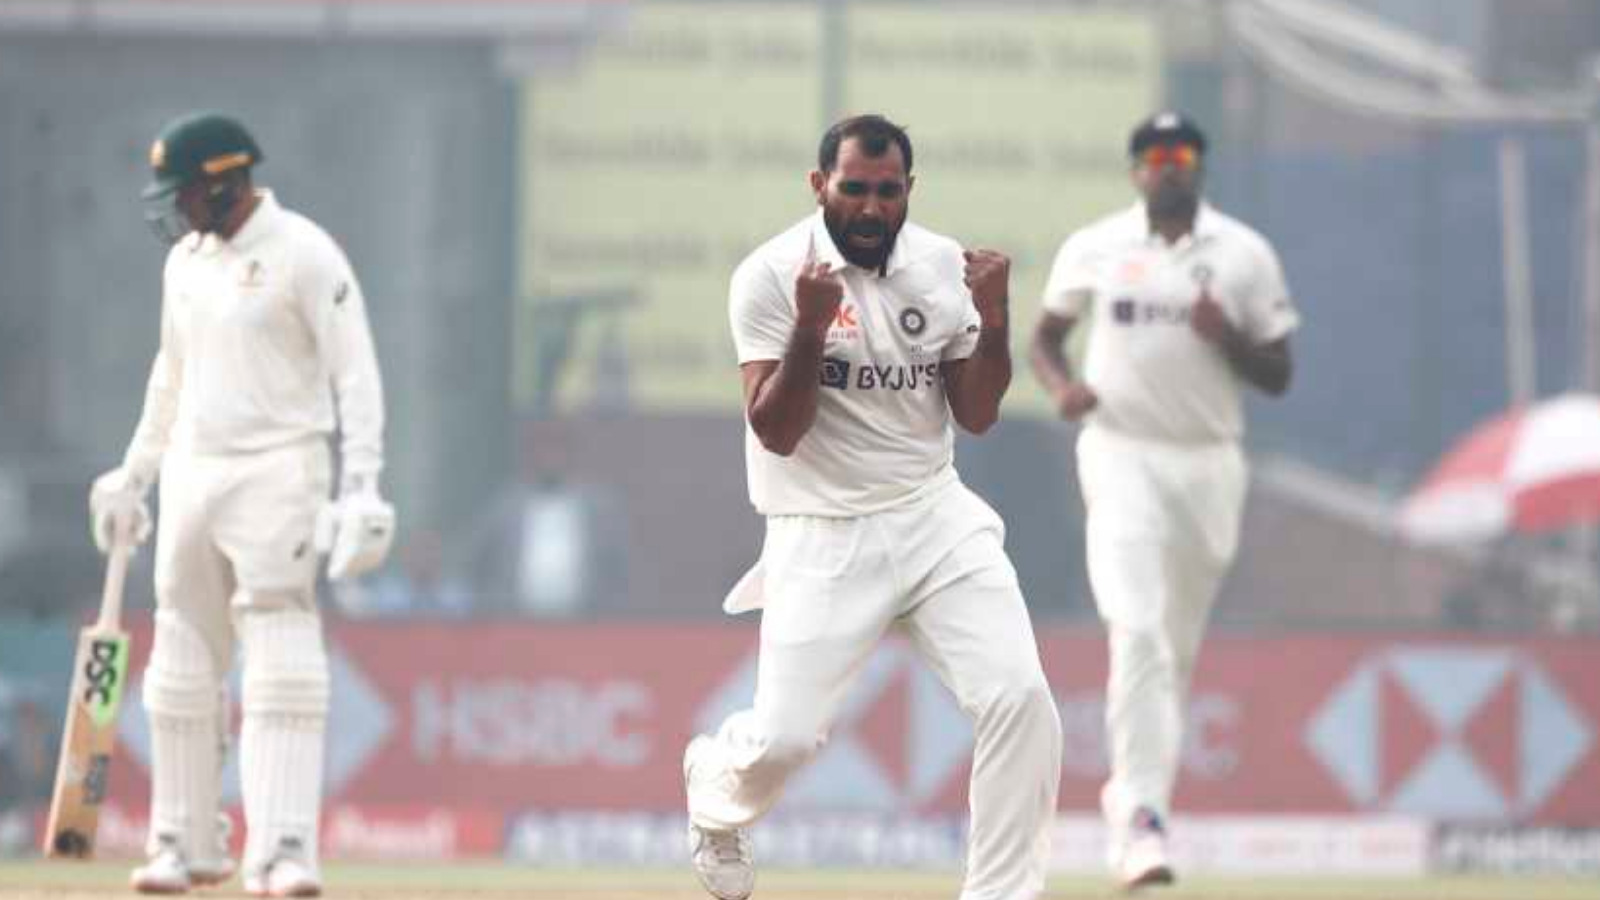 Mohammed Shami | IND vs AUS | image: Getty Images